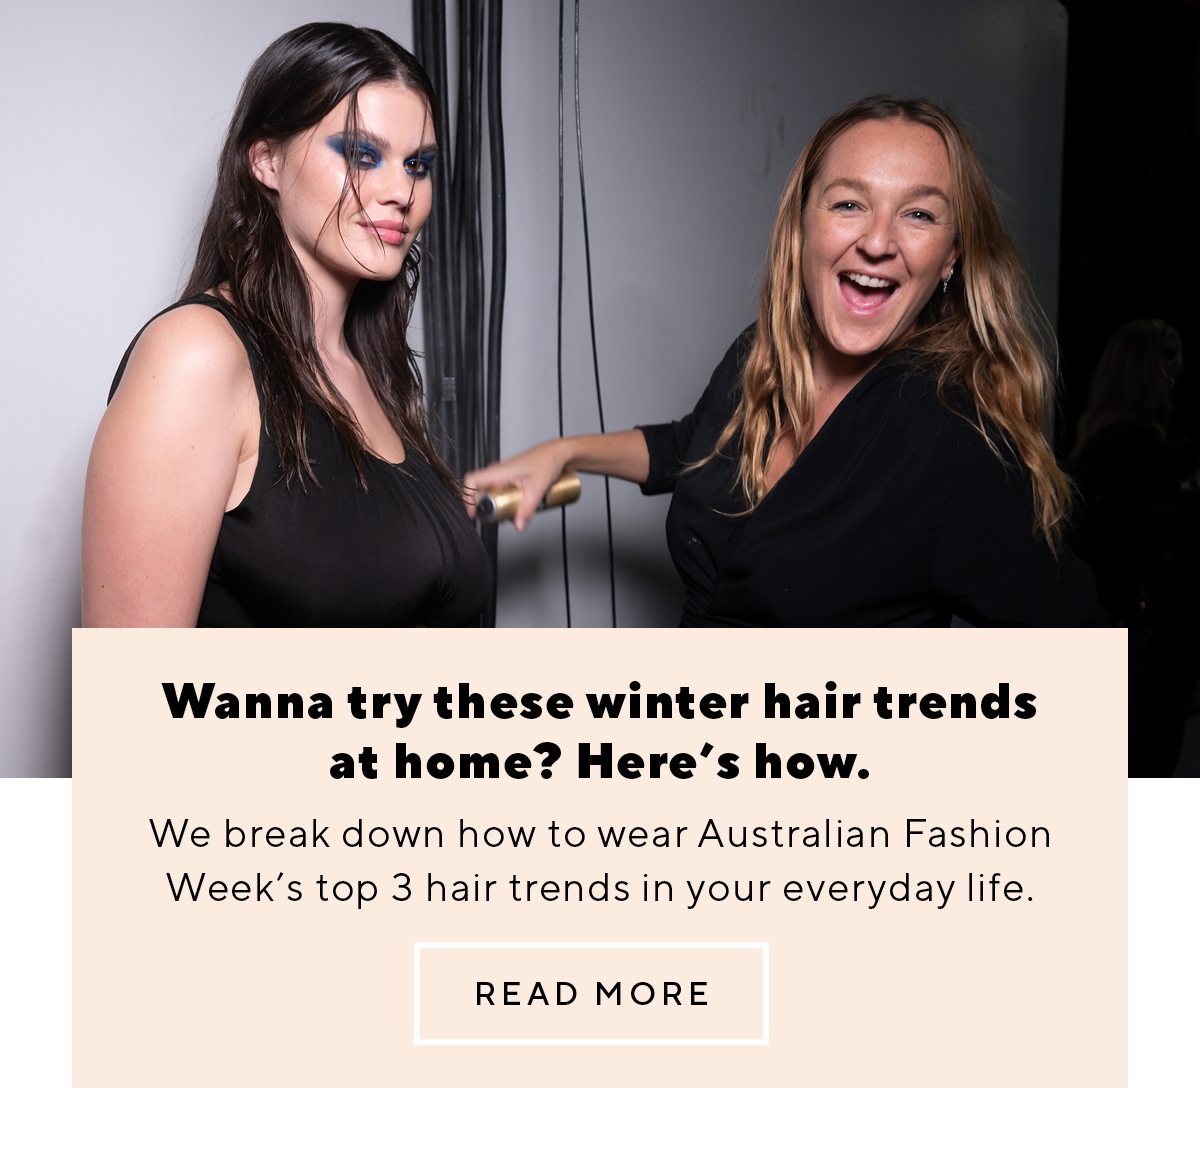 Wanna try these winter hair trends at home? Here’s how.